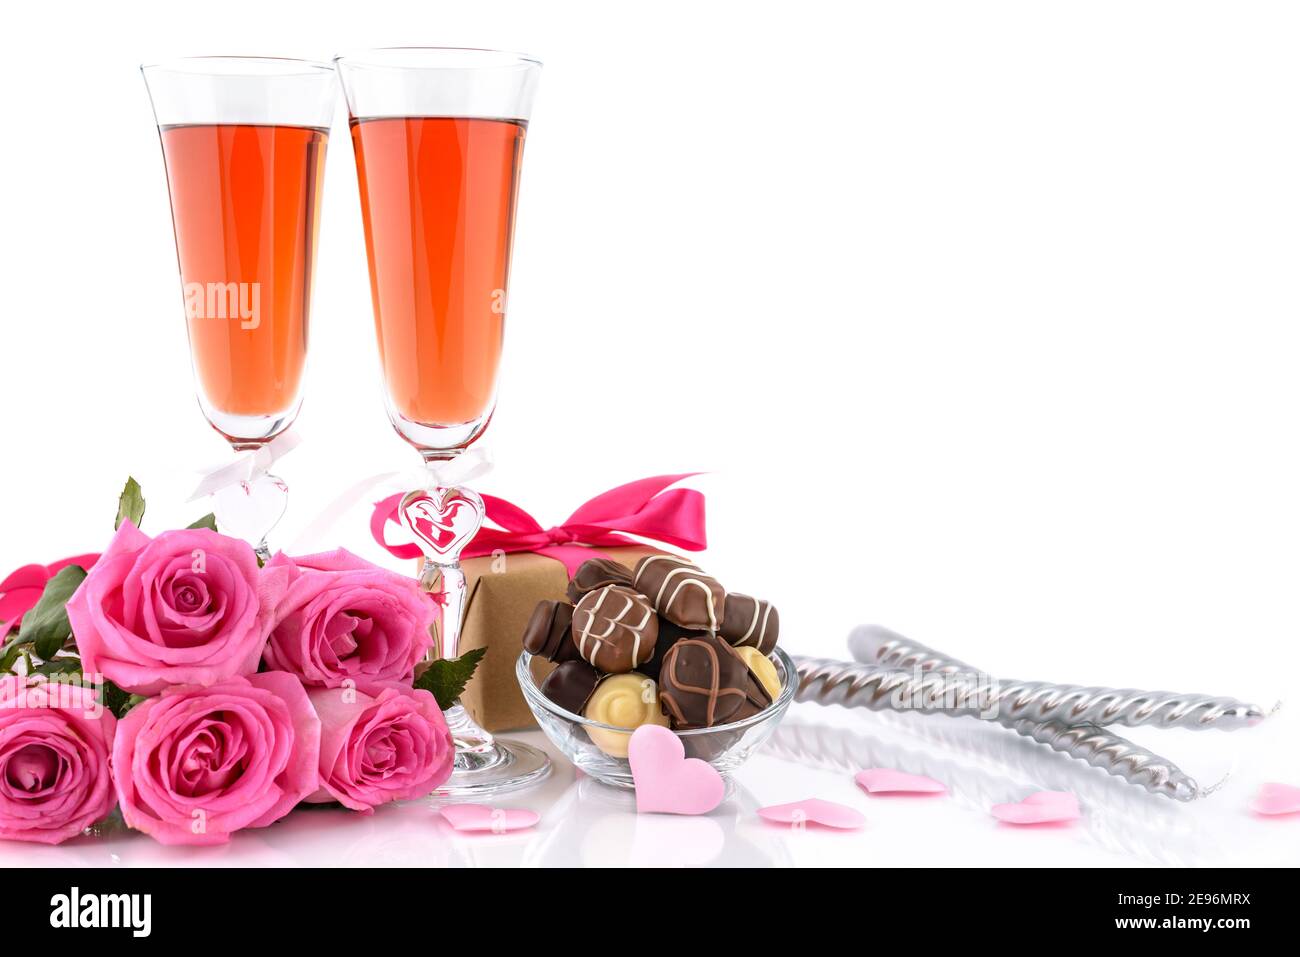 Valentine's Day concept. Two glasses of wine, gift box, candles, pink roses, sponge satin hearts and delicious chocolate pralines on a white backgroun Stock Photo